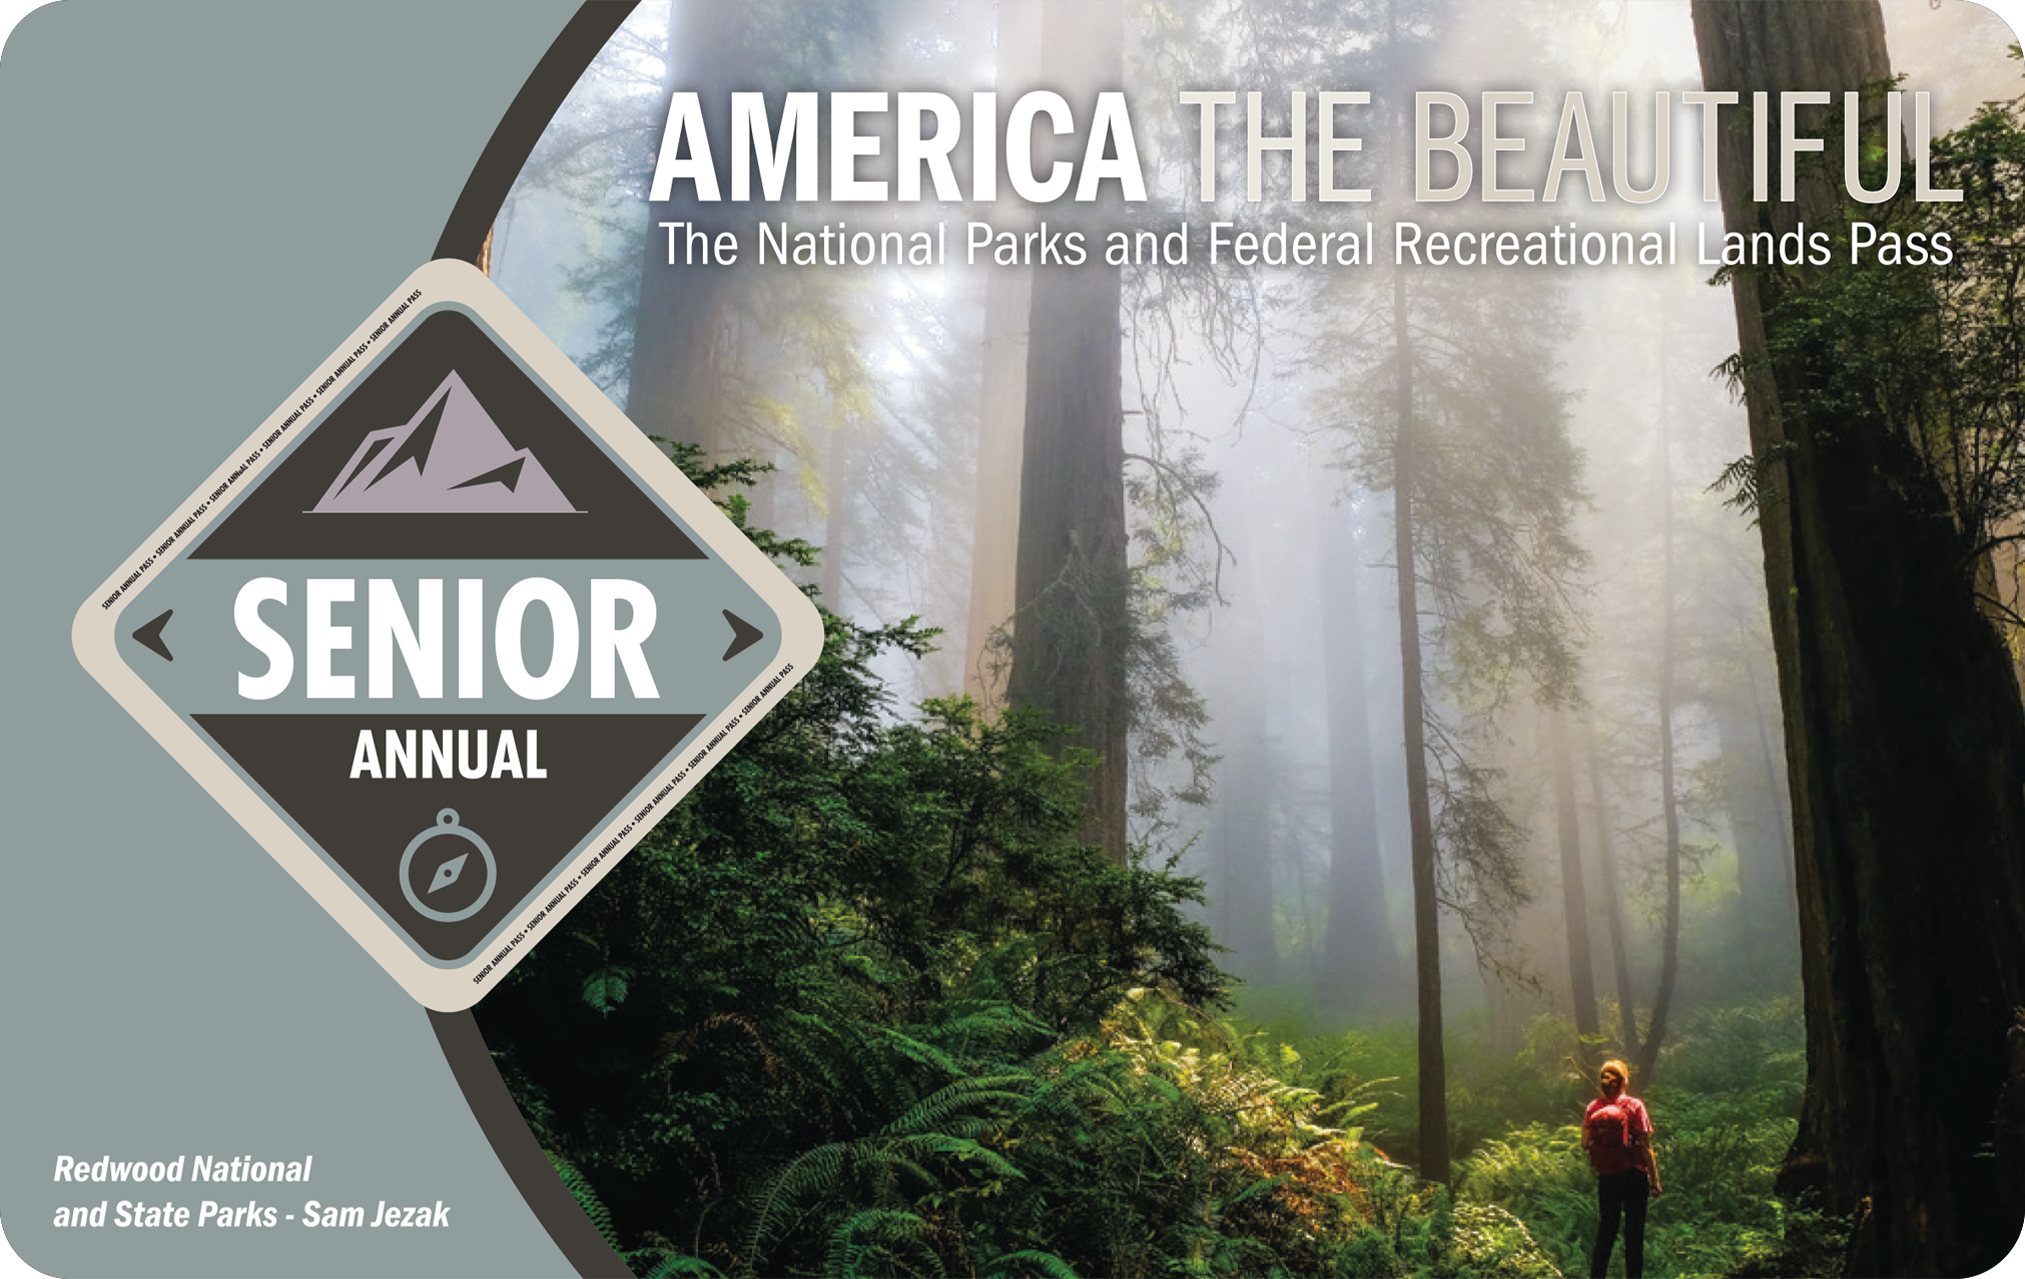 Senior Annual pass with image of person looking up in a forest.